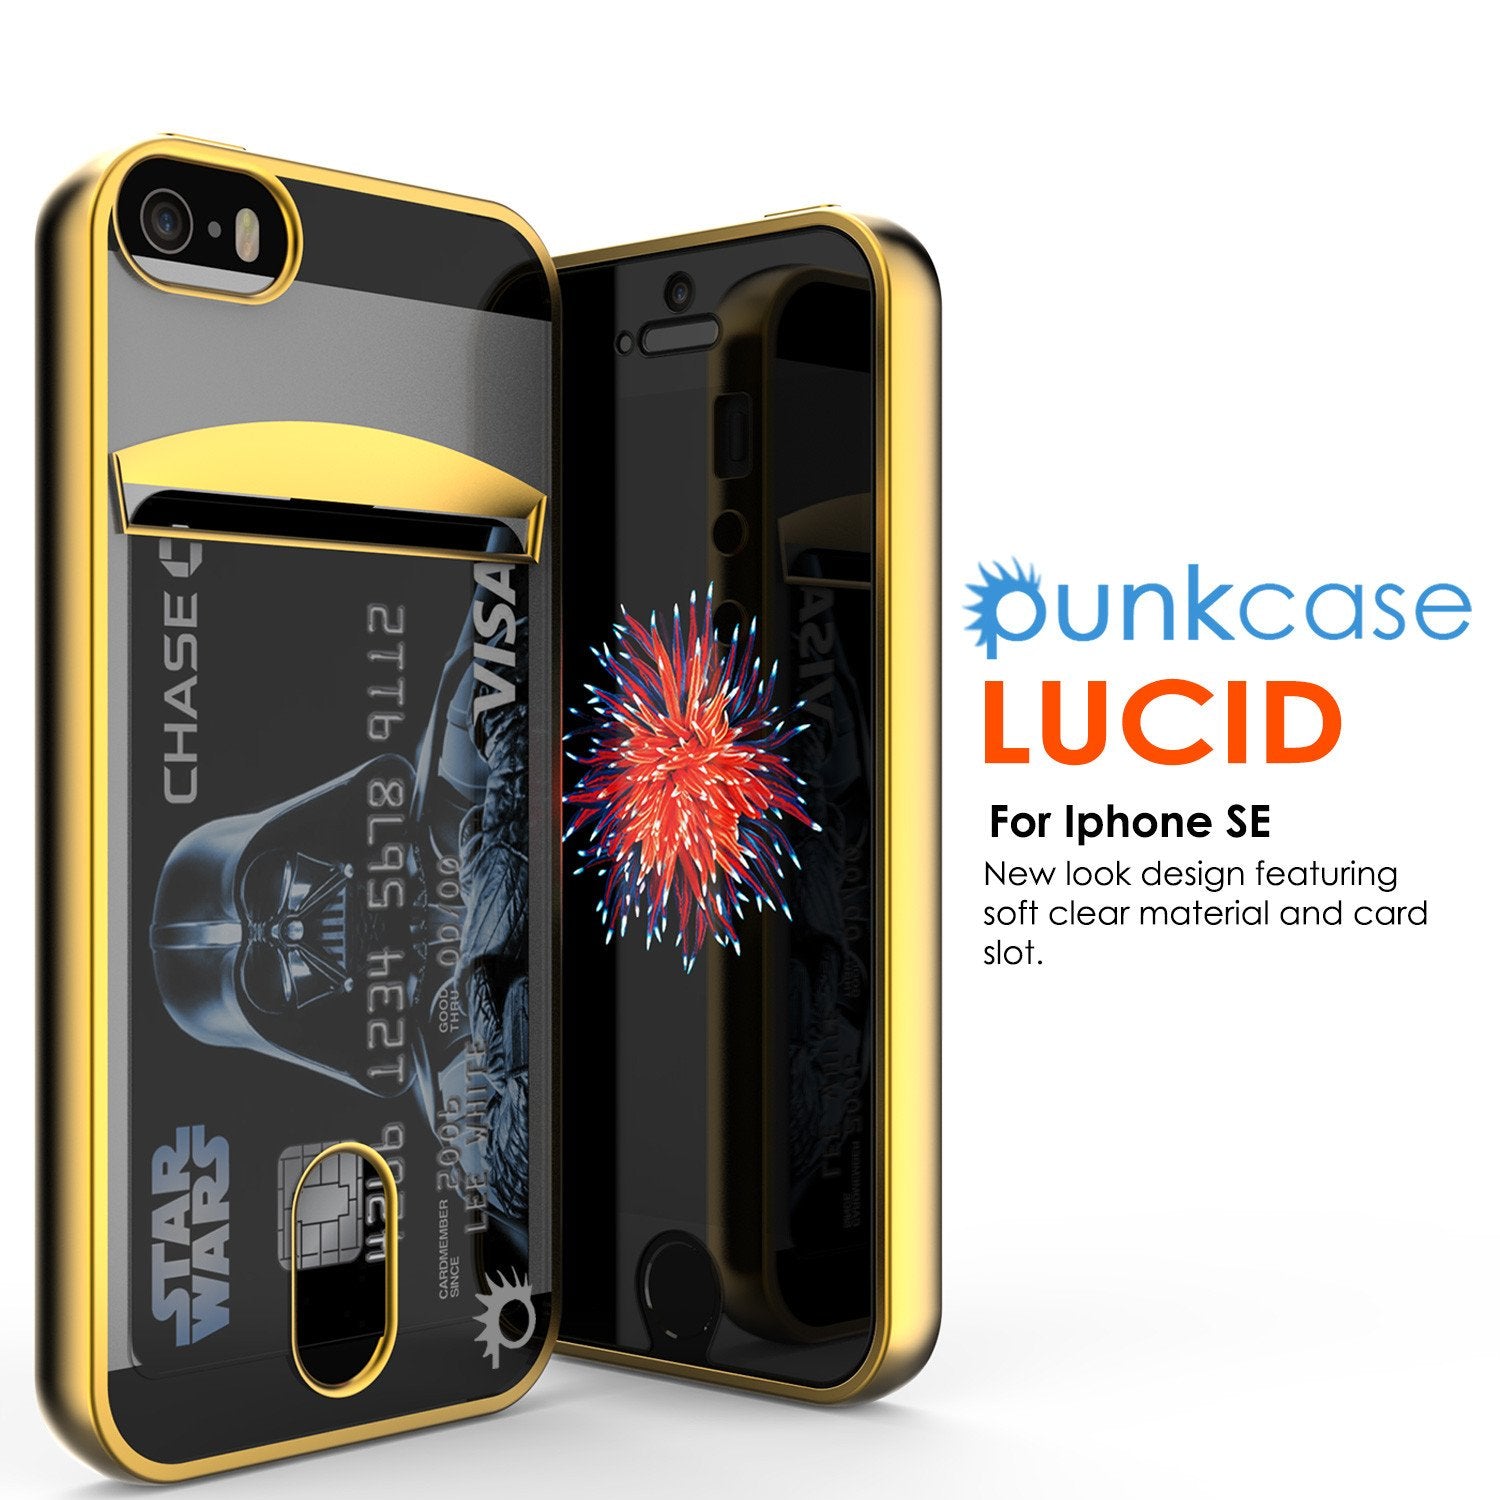 iPhone SE/5S/5 Case, PUNKCASE® LUCID Gold Series | Card Slot | SHIELD Screen Protector | Ultra fit